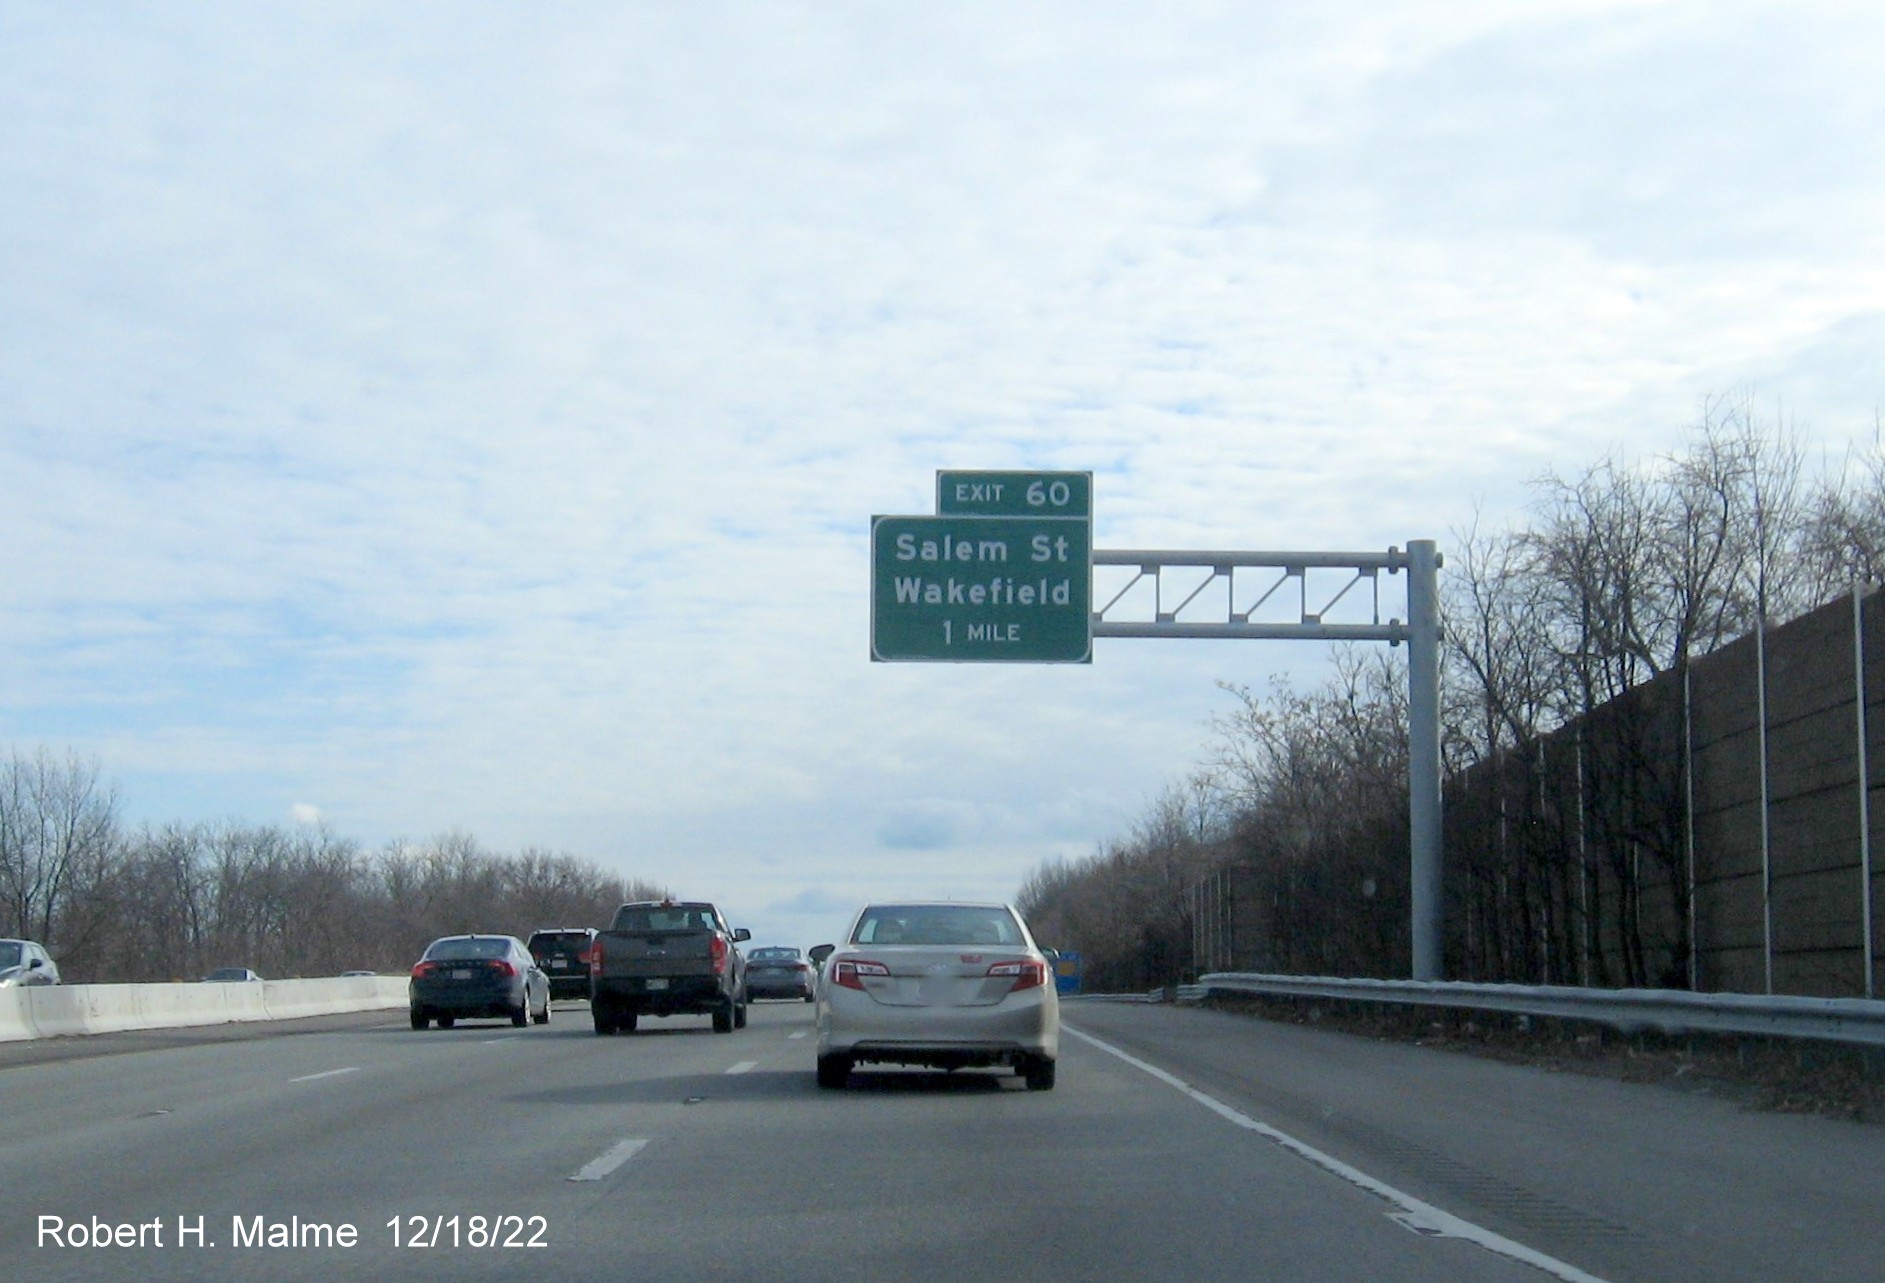 Image of newly placed 1 mile advance overhead sign for the Salem Street exit on I-95/MA 128 North in Wakefield, December 2022